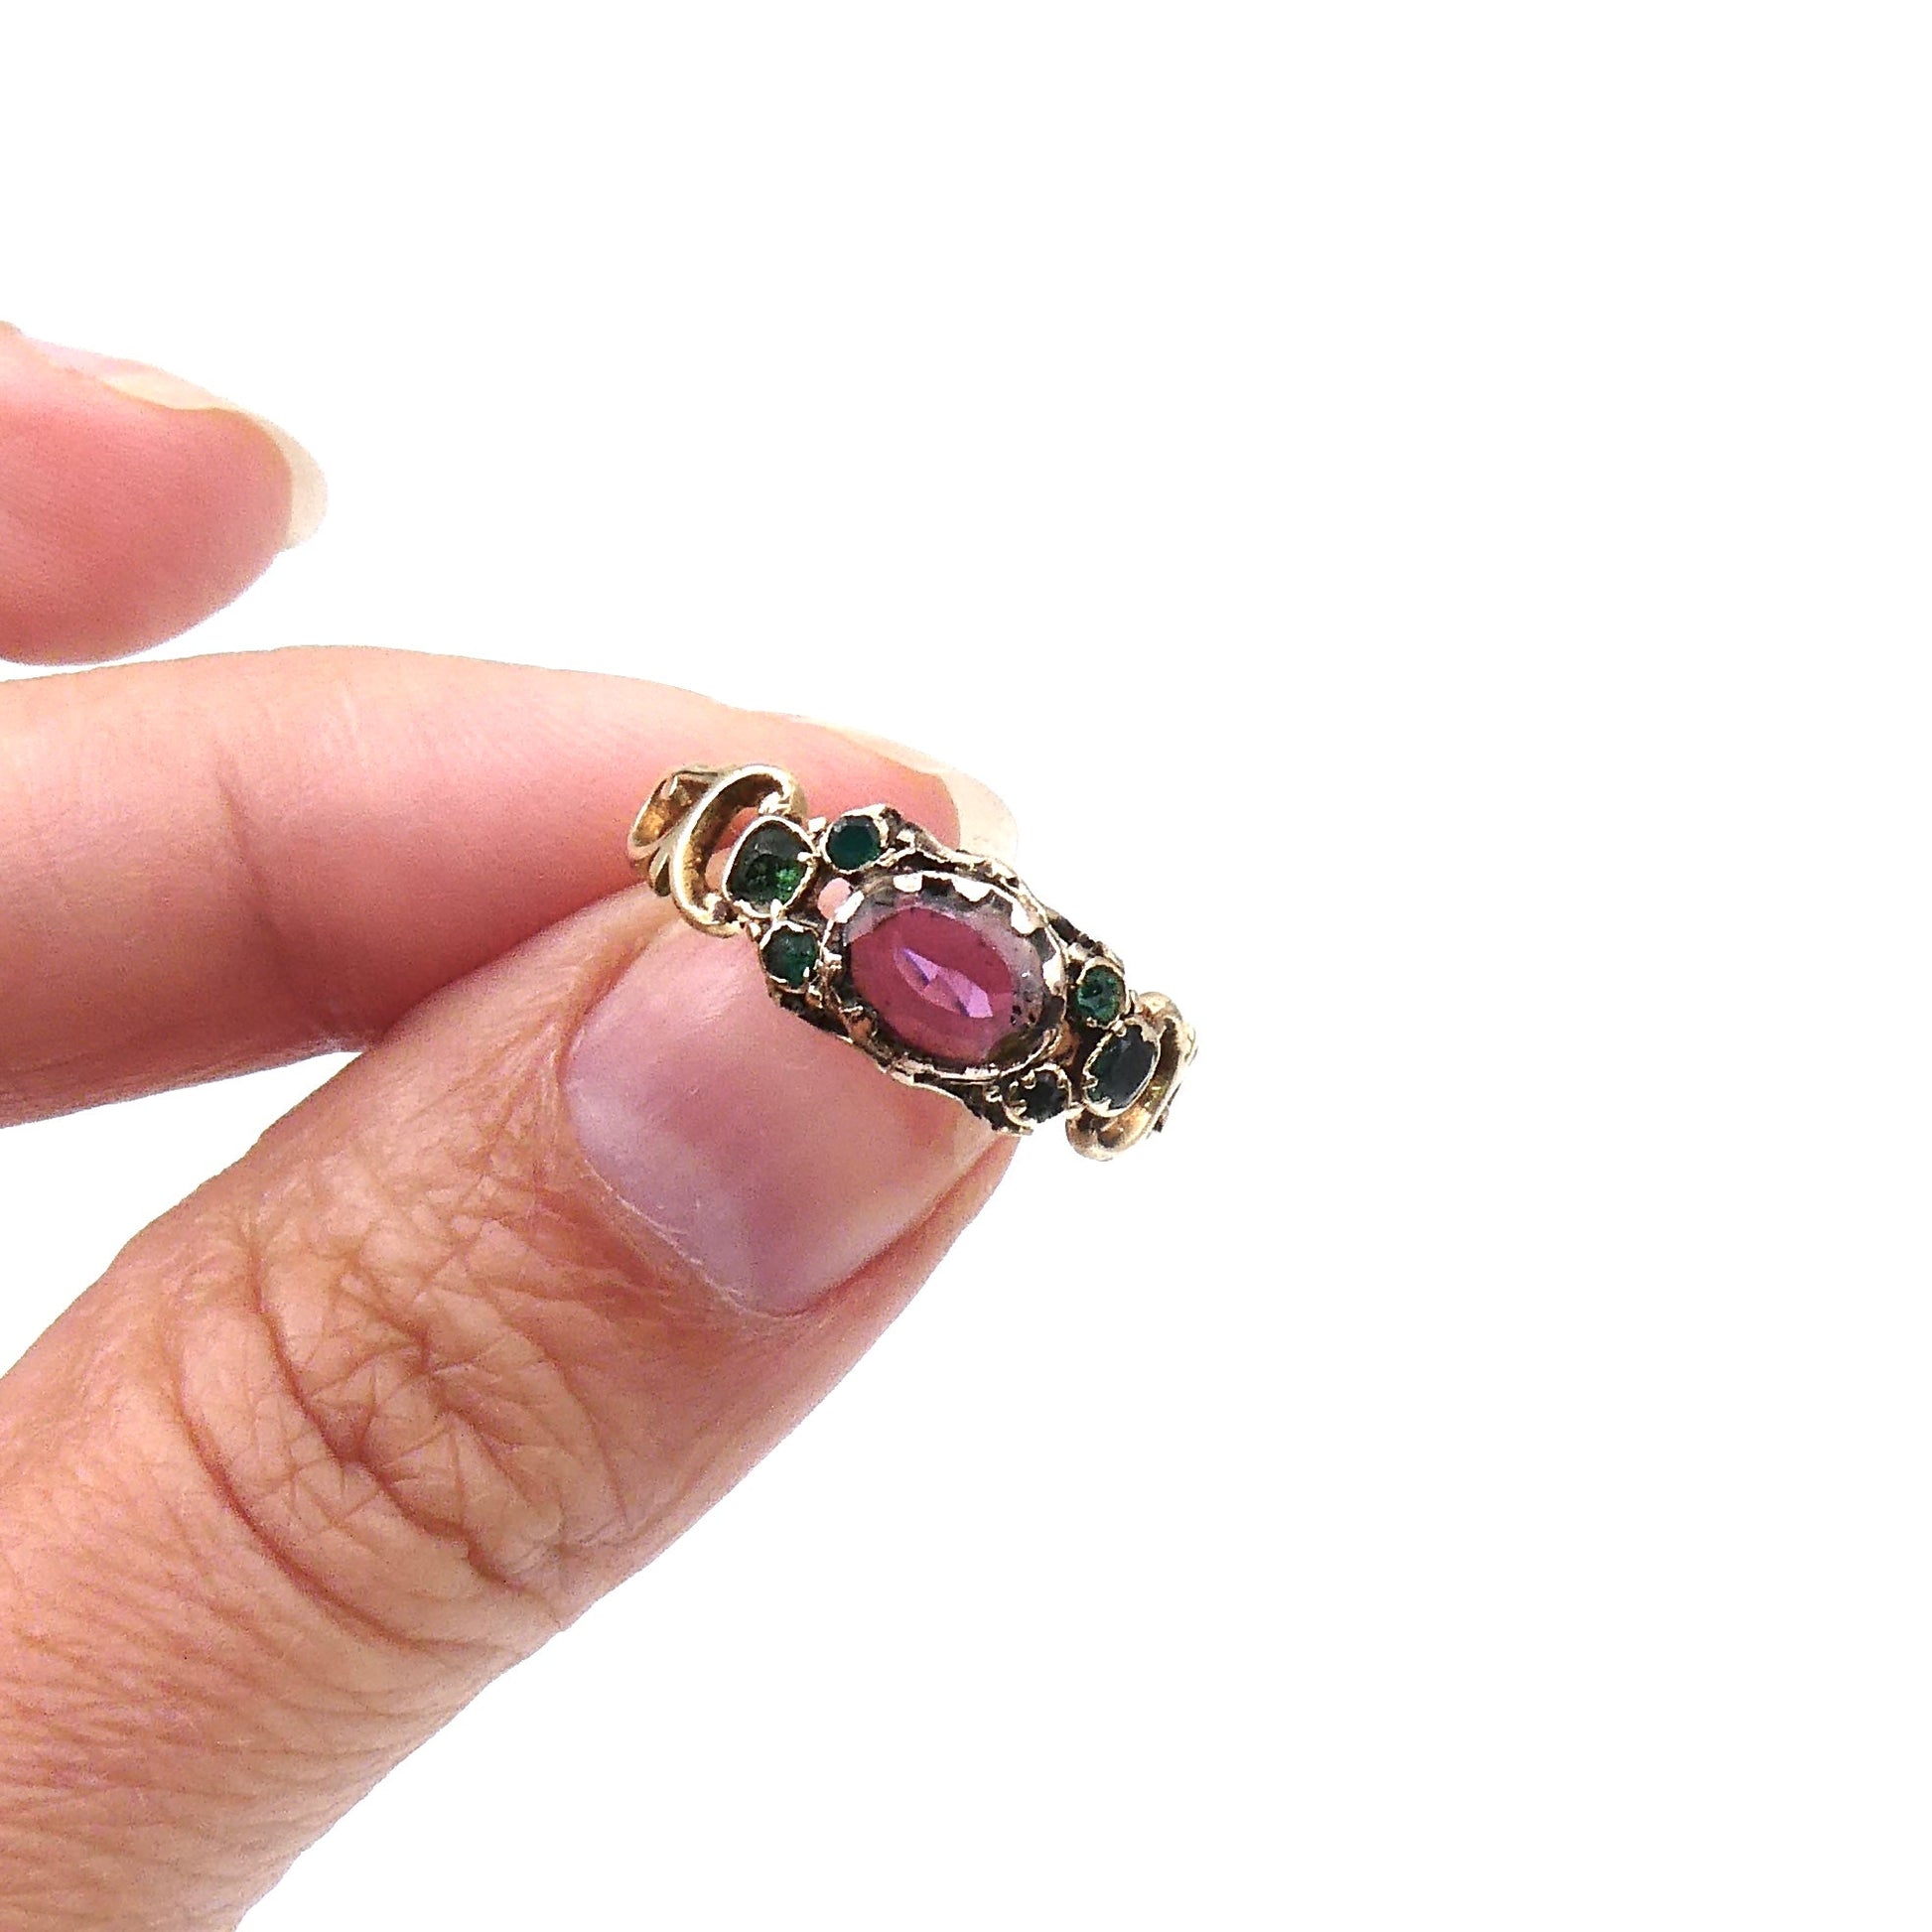 Antique garnet and emerald ring with open work shoulders, an ornate victorian ring. - Collected